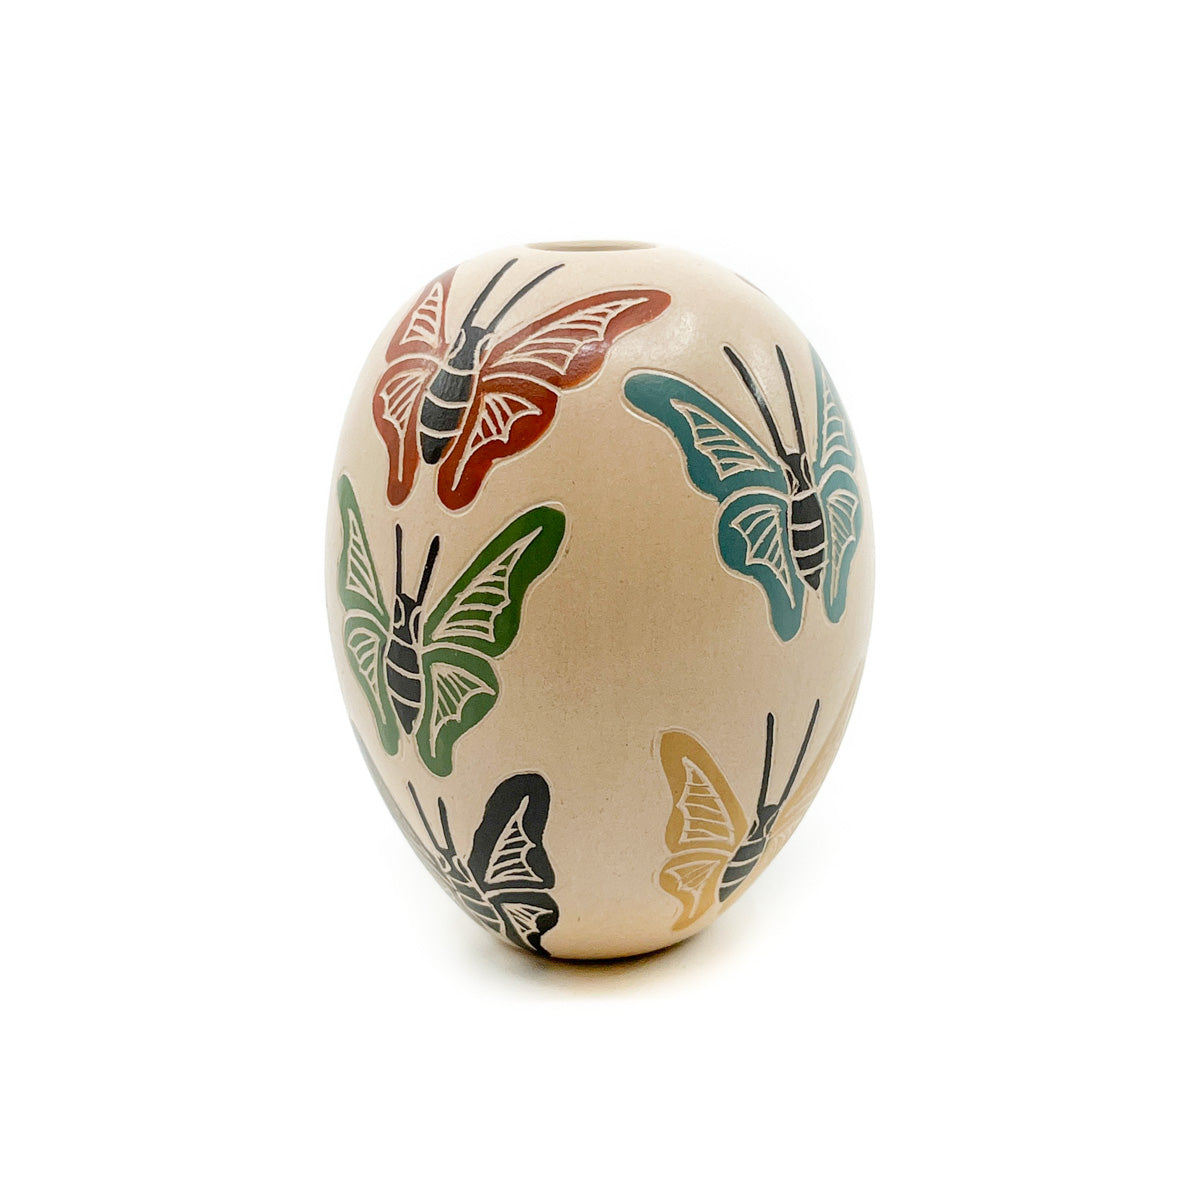 Seed Pot with Multi-colored Butterflies on White Clay